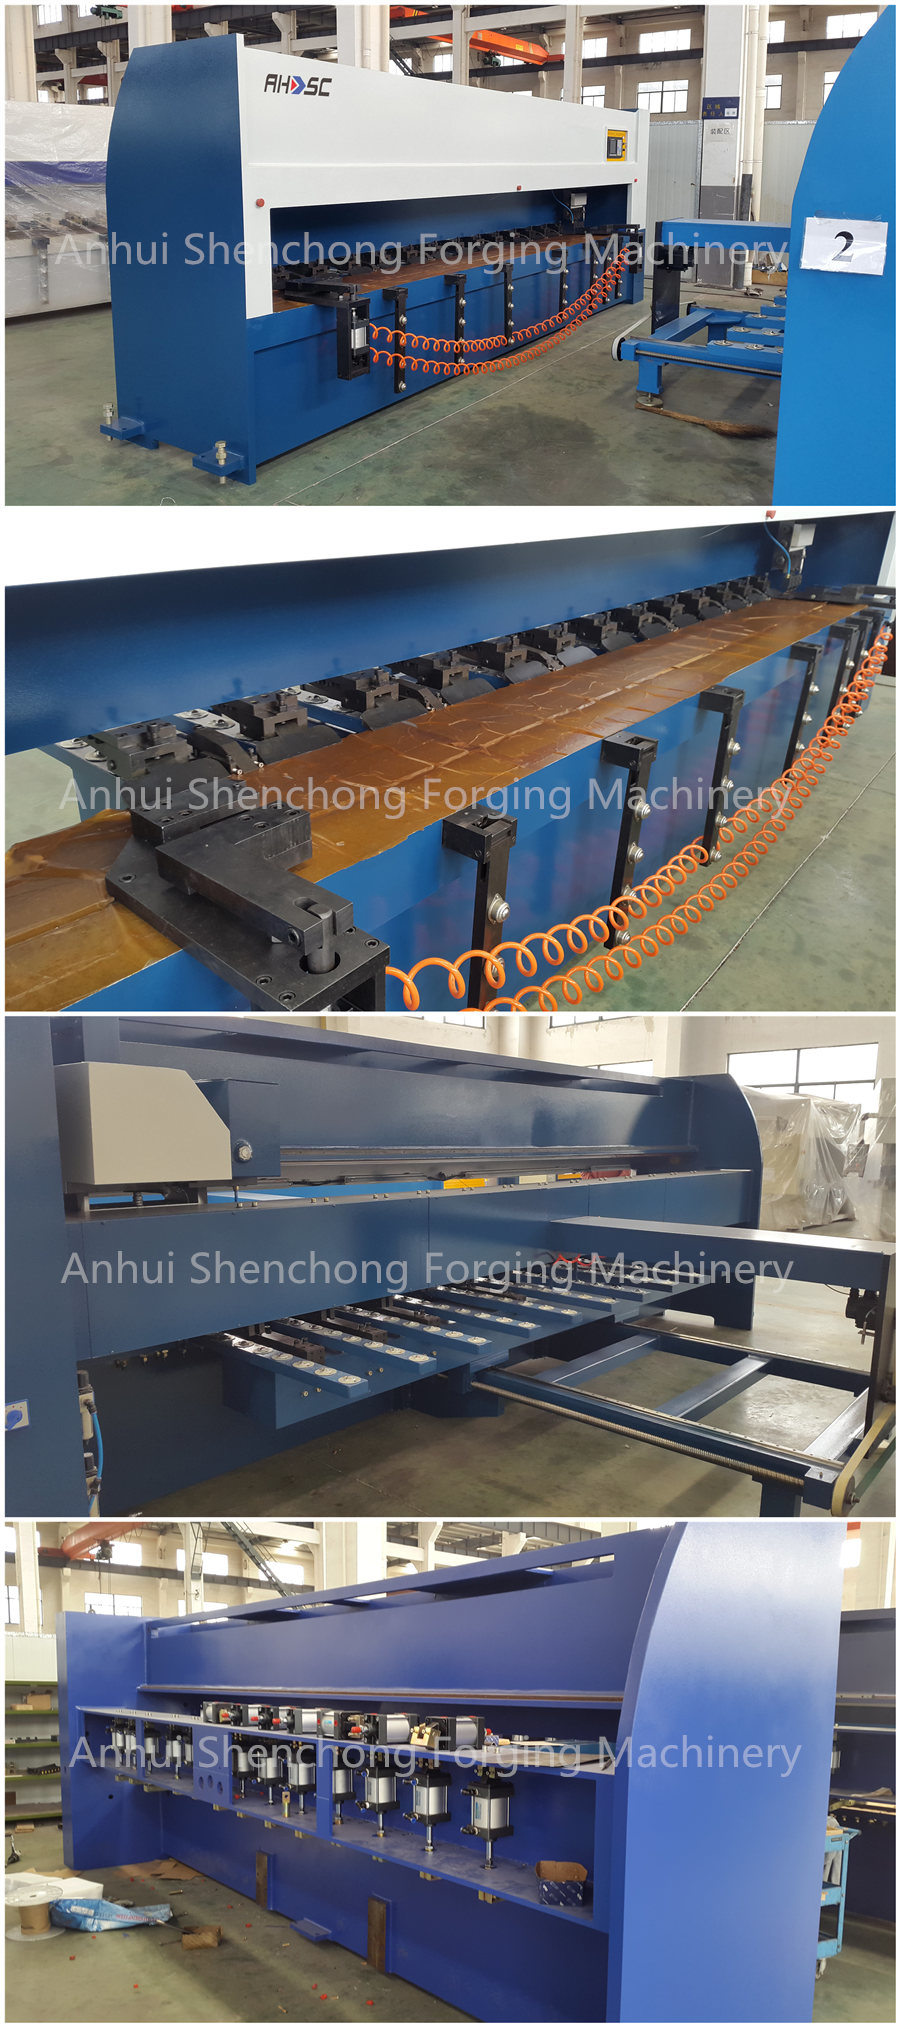 Composite Panel CNC V Grooving Machine for Sale for Stainless Steel